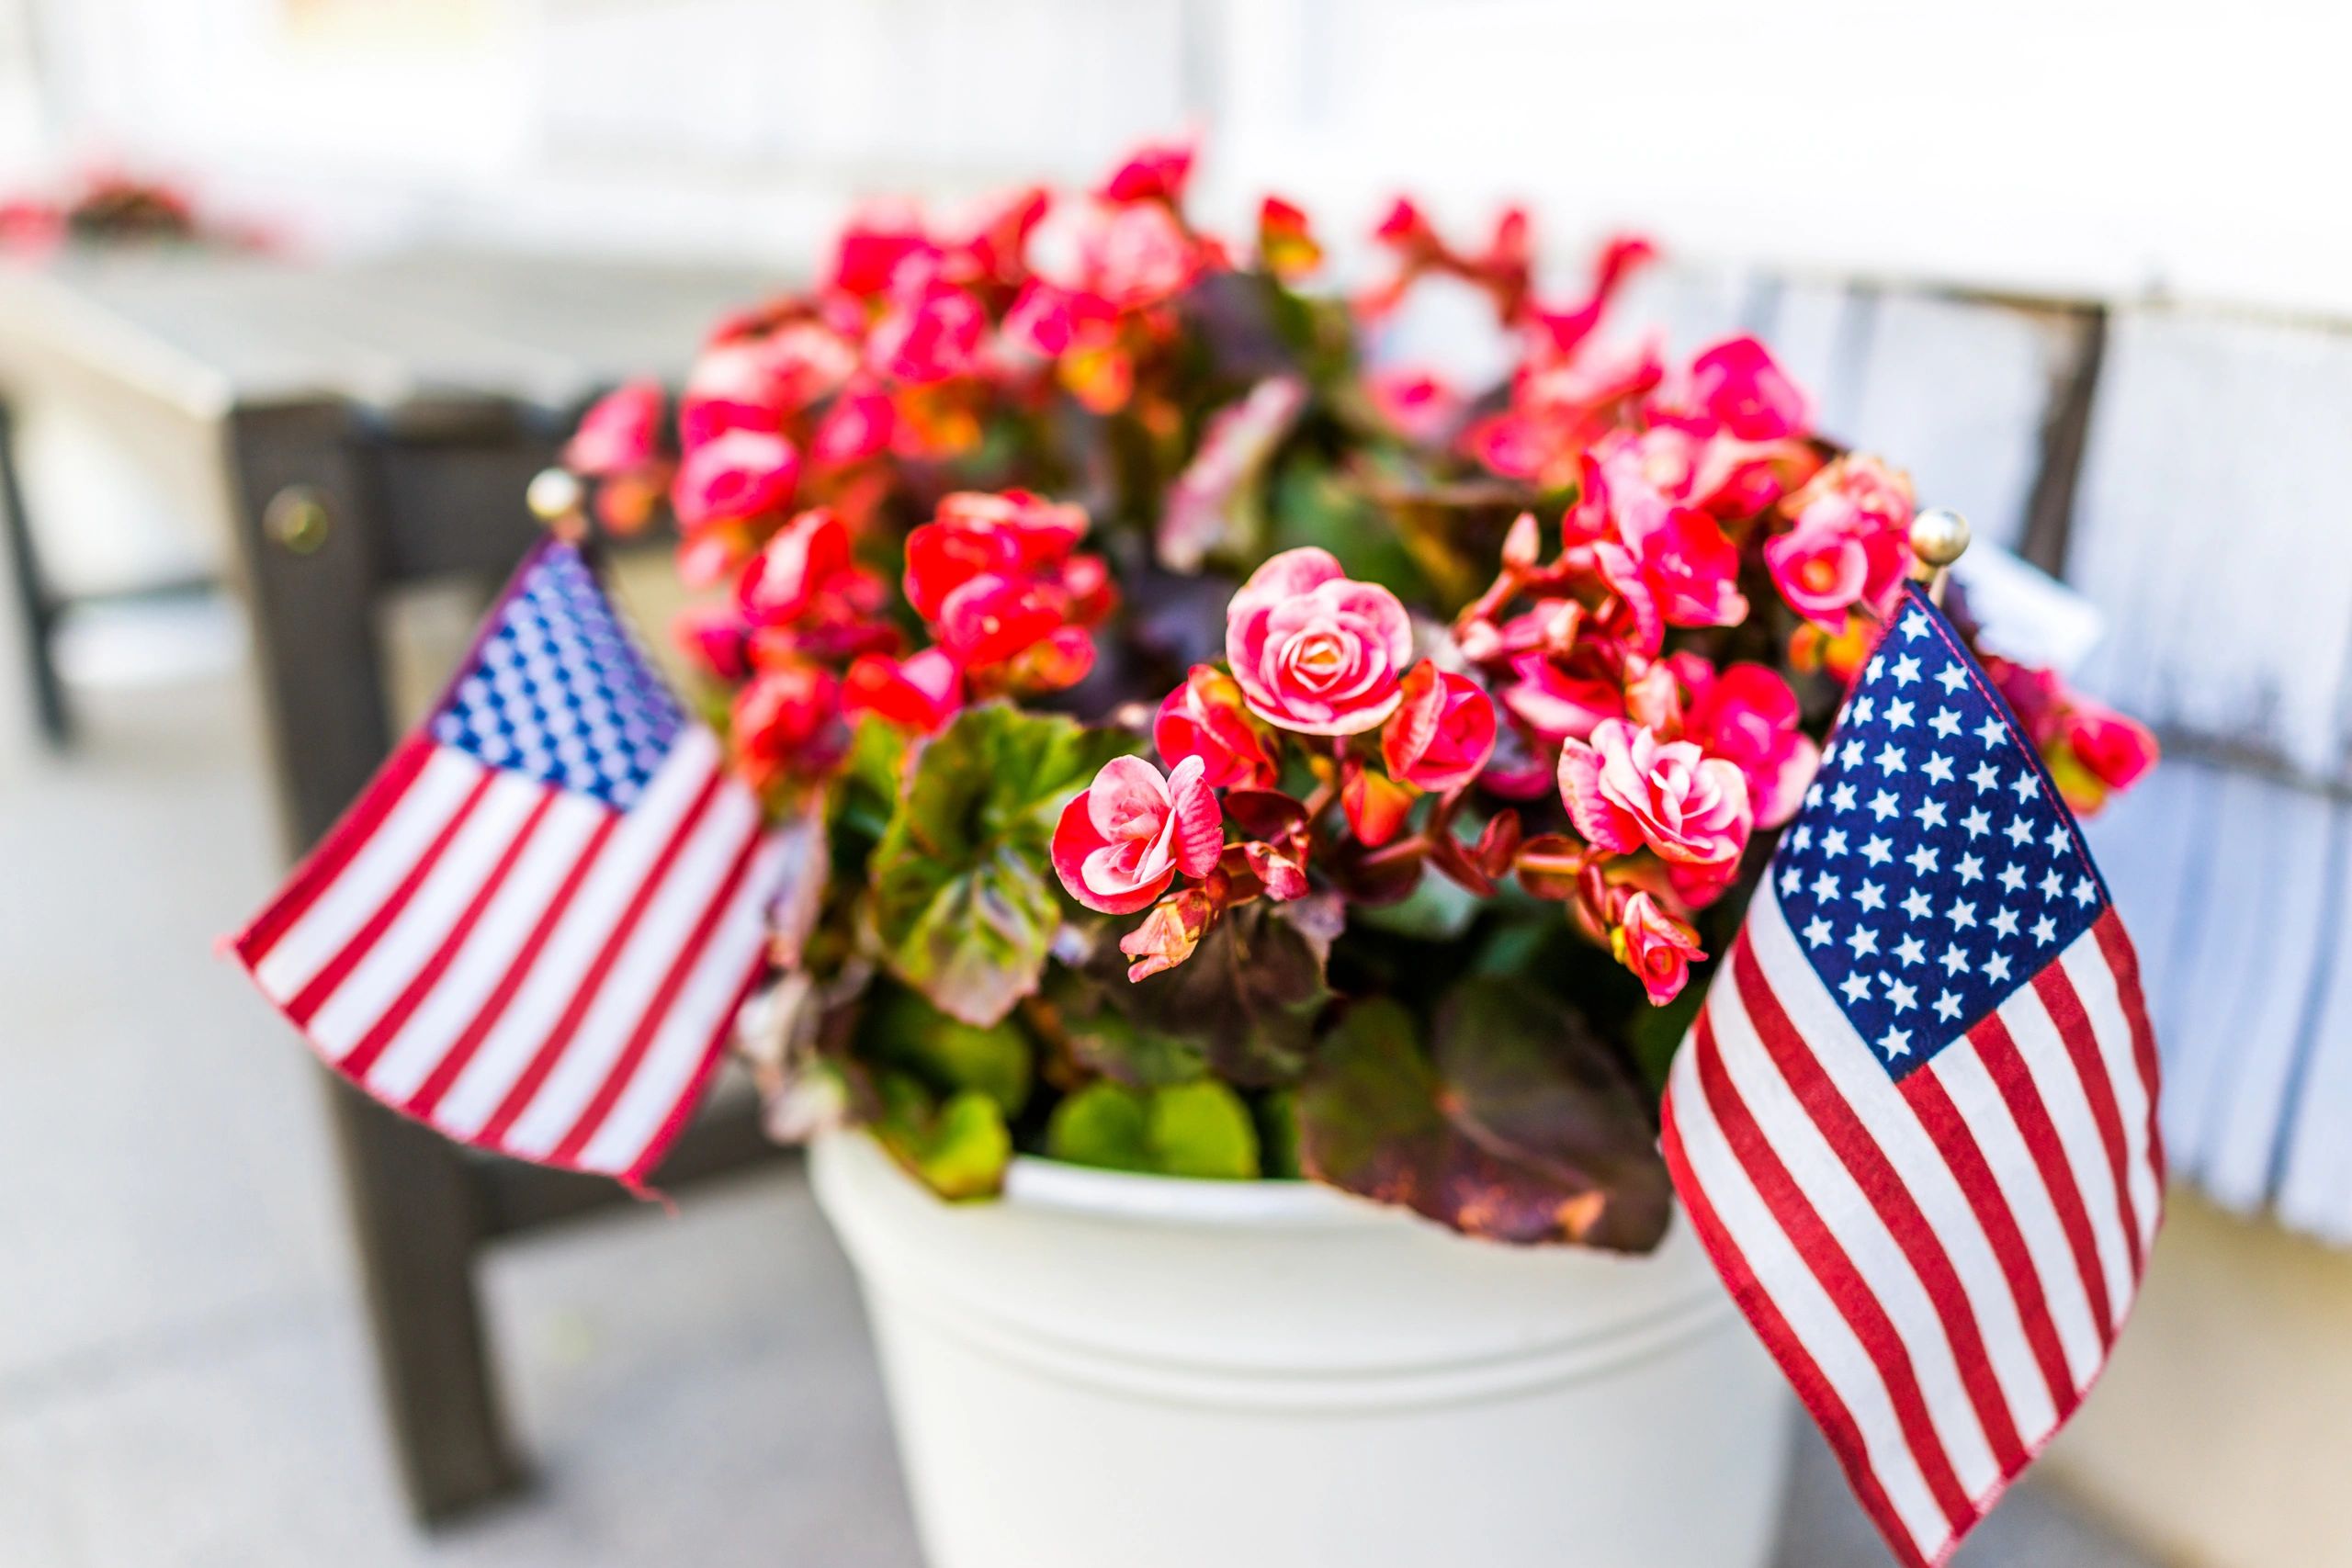 White flower pot wih red flowers and two American flags.